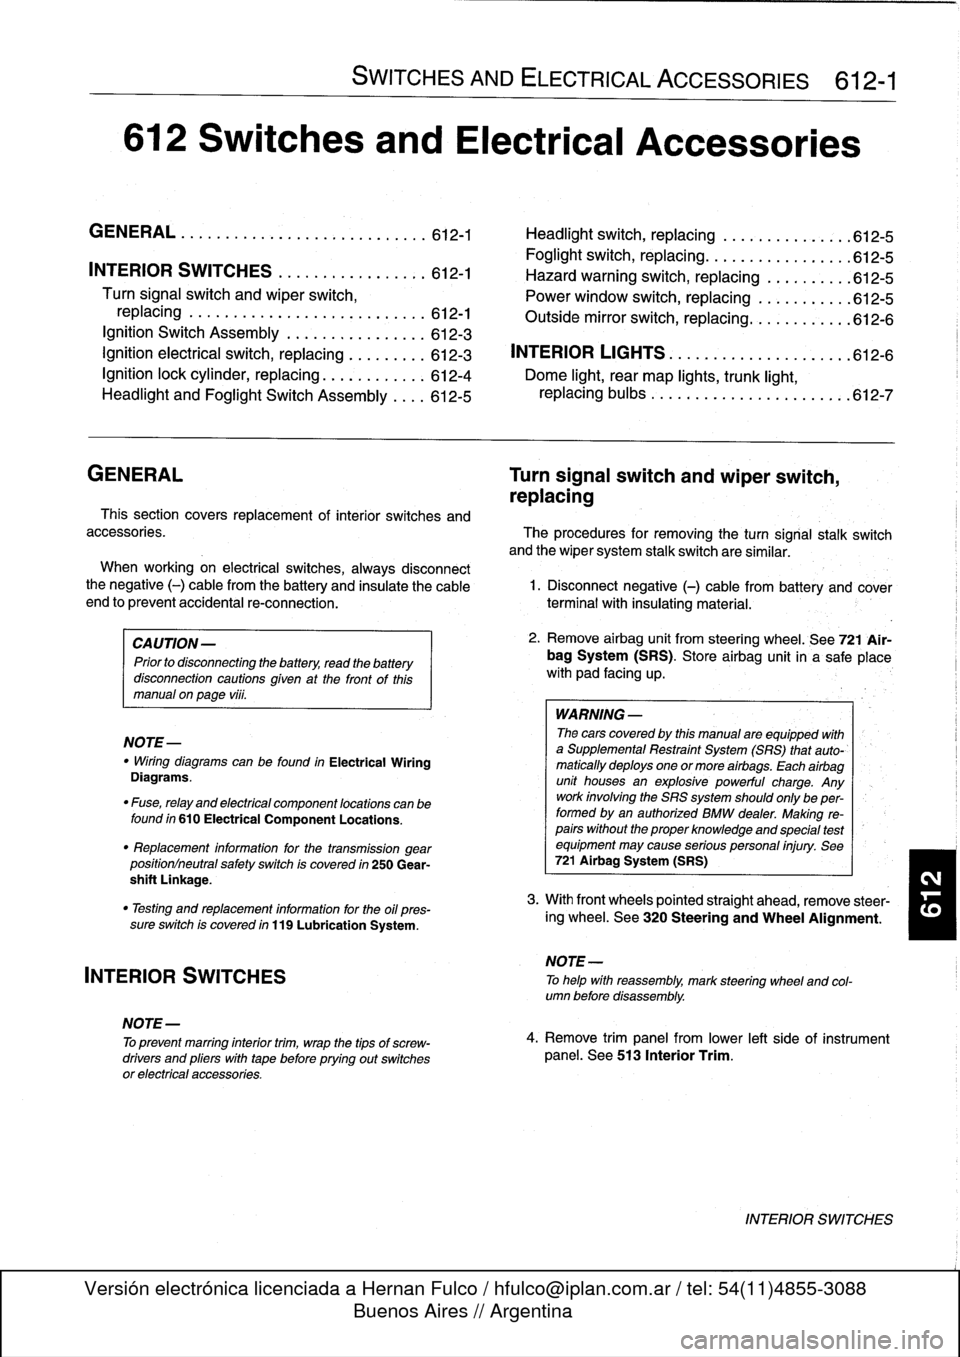 BMW 325i 1992 E36 Workshop Manual 
612
Switches
and
Electrical
Accessories

GENERAL
.
.
.
.
.
.
.
.
.
...
.
.
.
.
.
...
.
......
.612-1

	

Headlight
switch,
replacing

	

..
.
...
.
.
.
.
.
.
.
.
.
612-5

Foglight
switch,
replacing
.